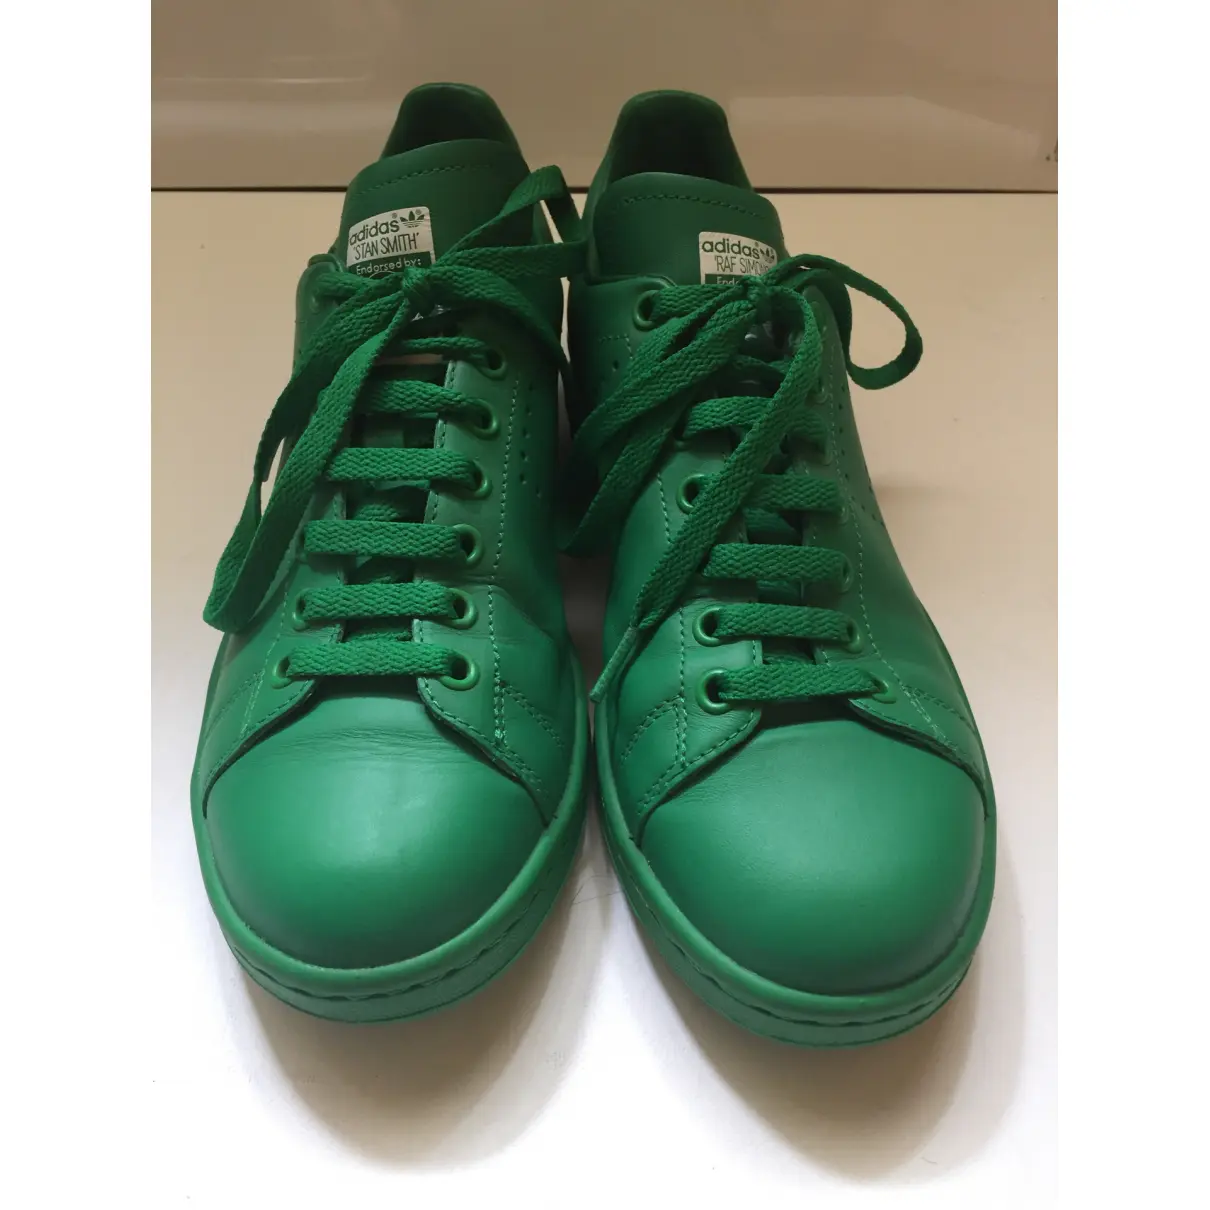 Buy Adidas x Raf Simons Stan Smith leather trainers online